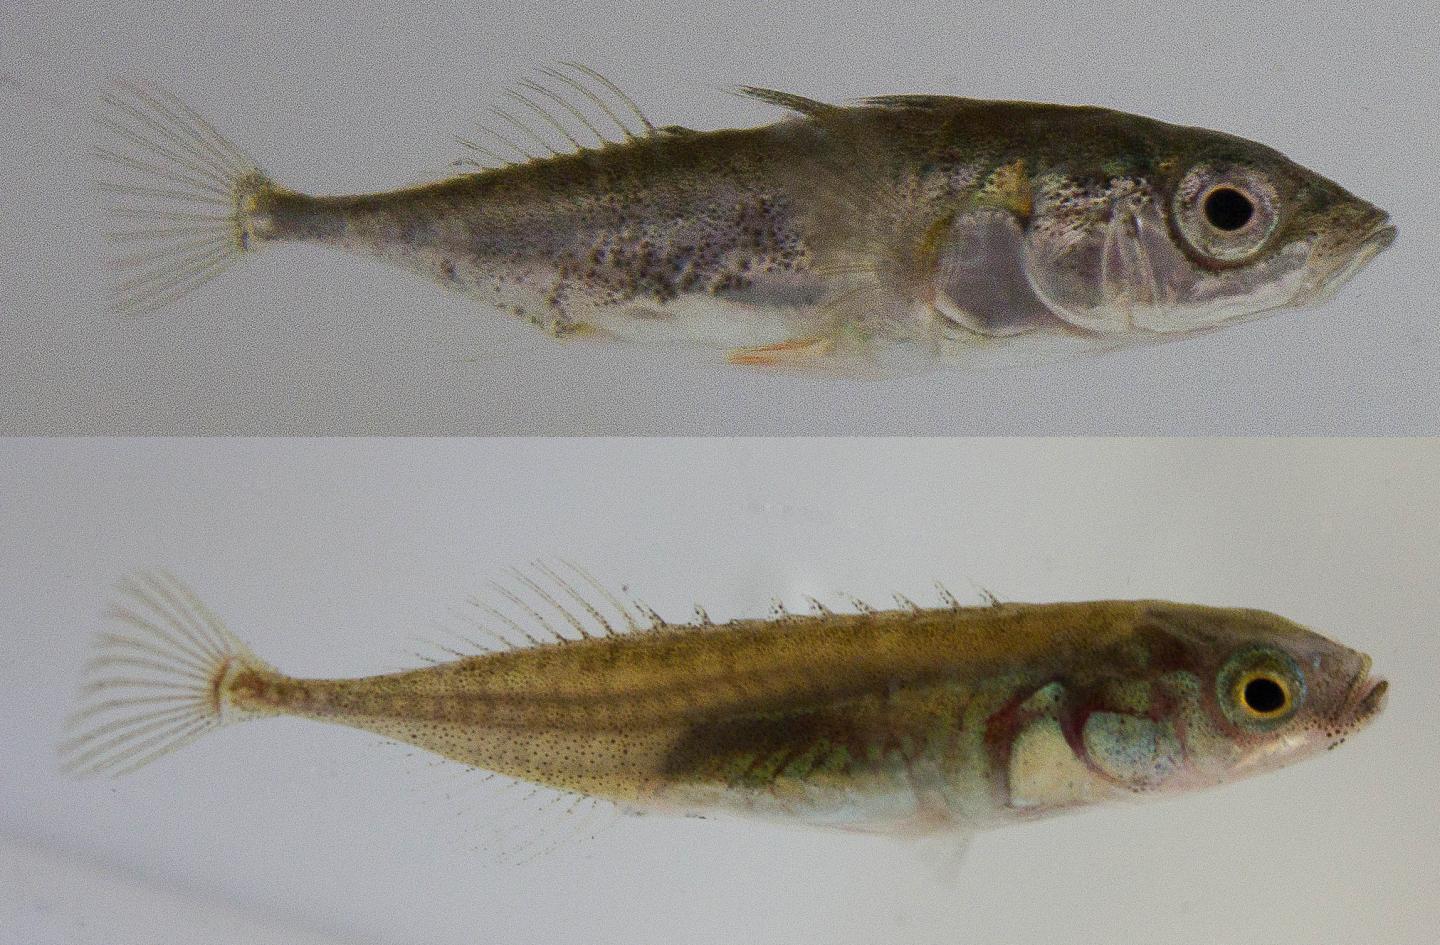 Adult Three-Spined (Top) and Nine-Spined (Bottom) Sticklebacks from the Study Population